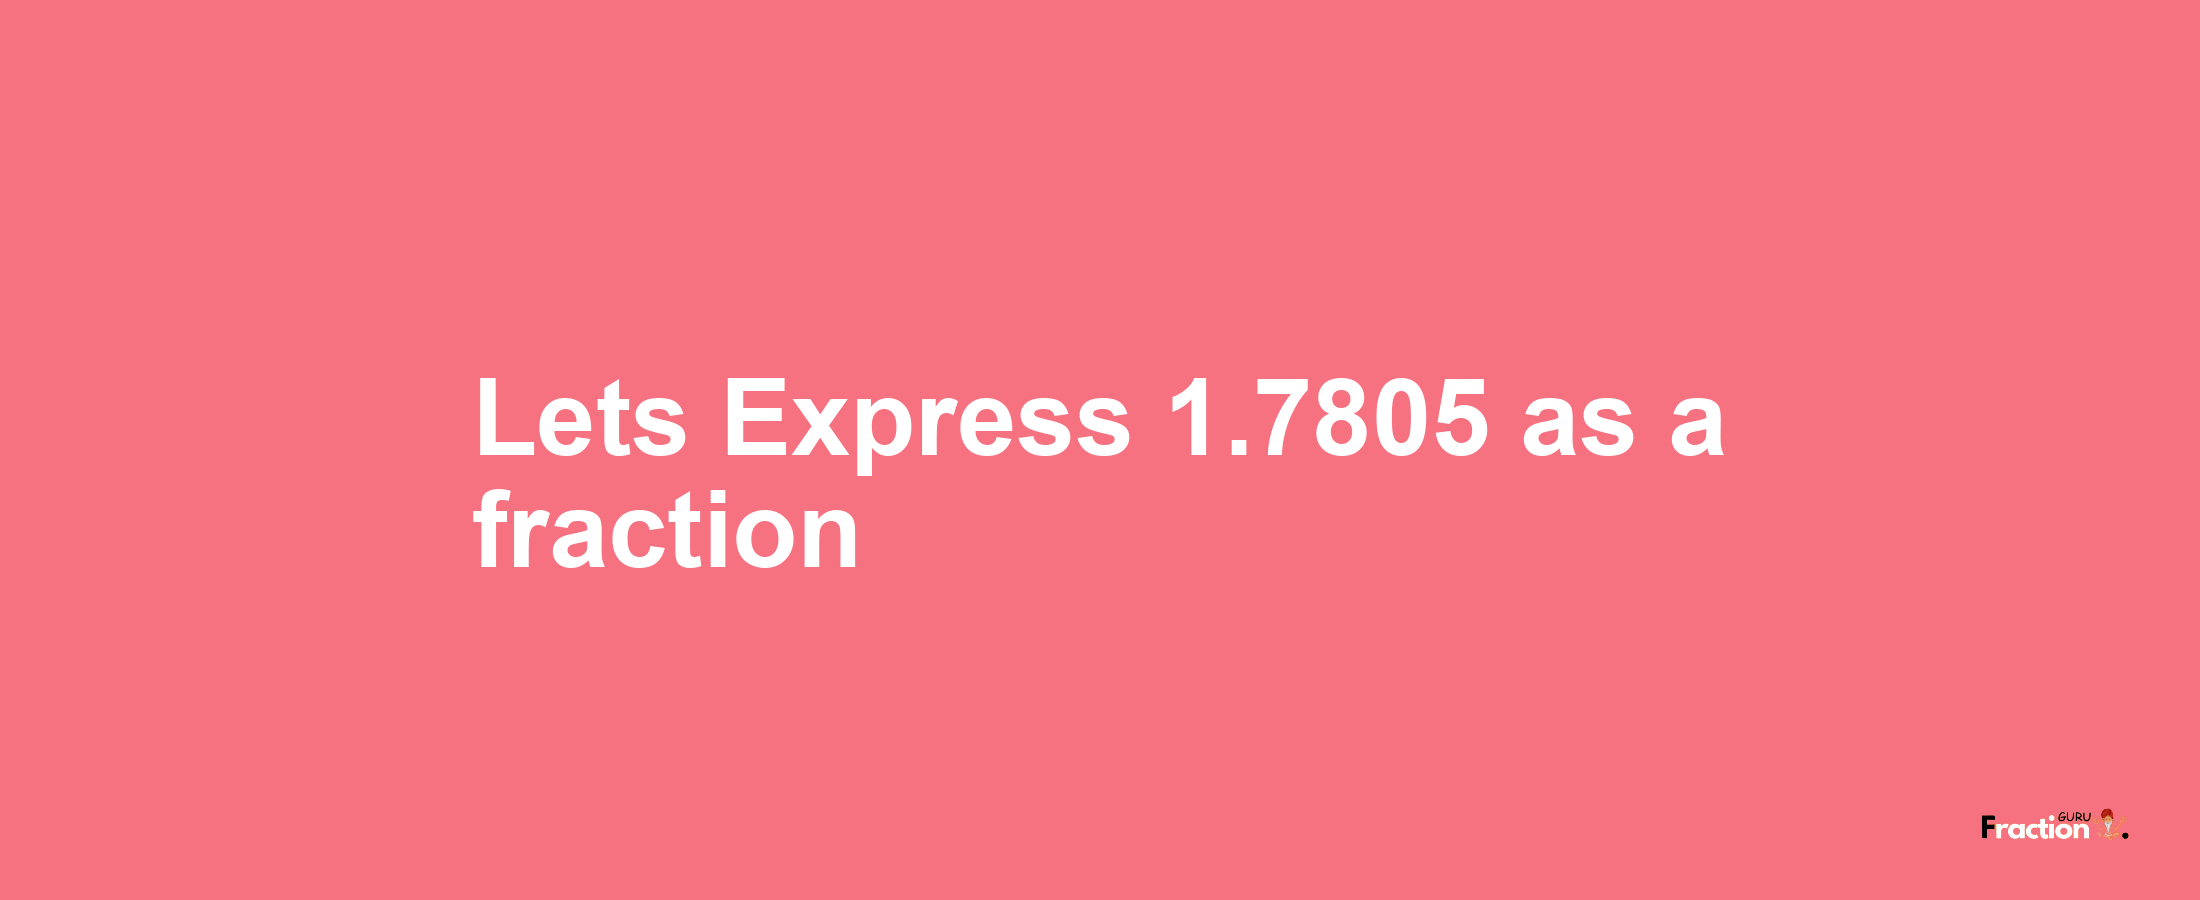 Lets Express 1.7805 as afraction